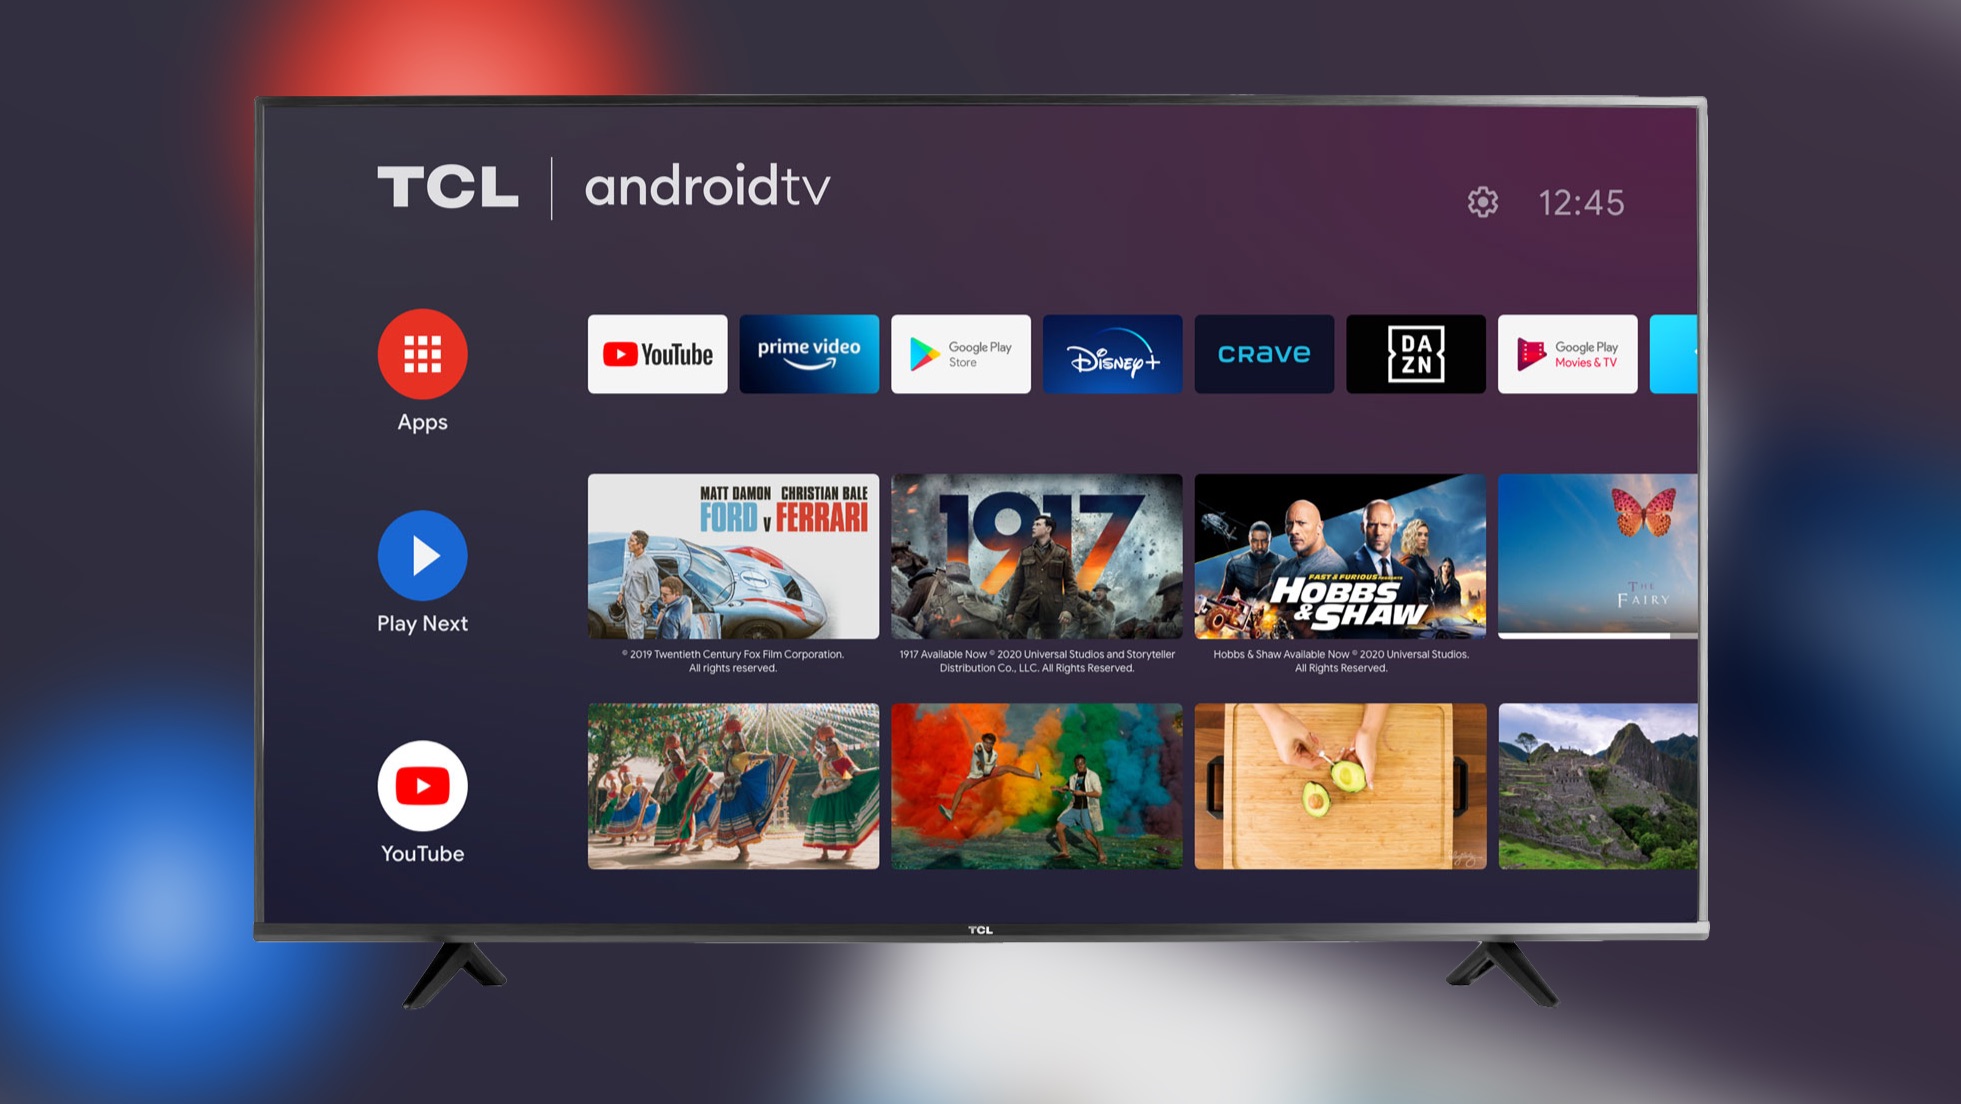 Telewizor TCL z Android TV